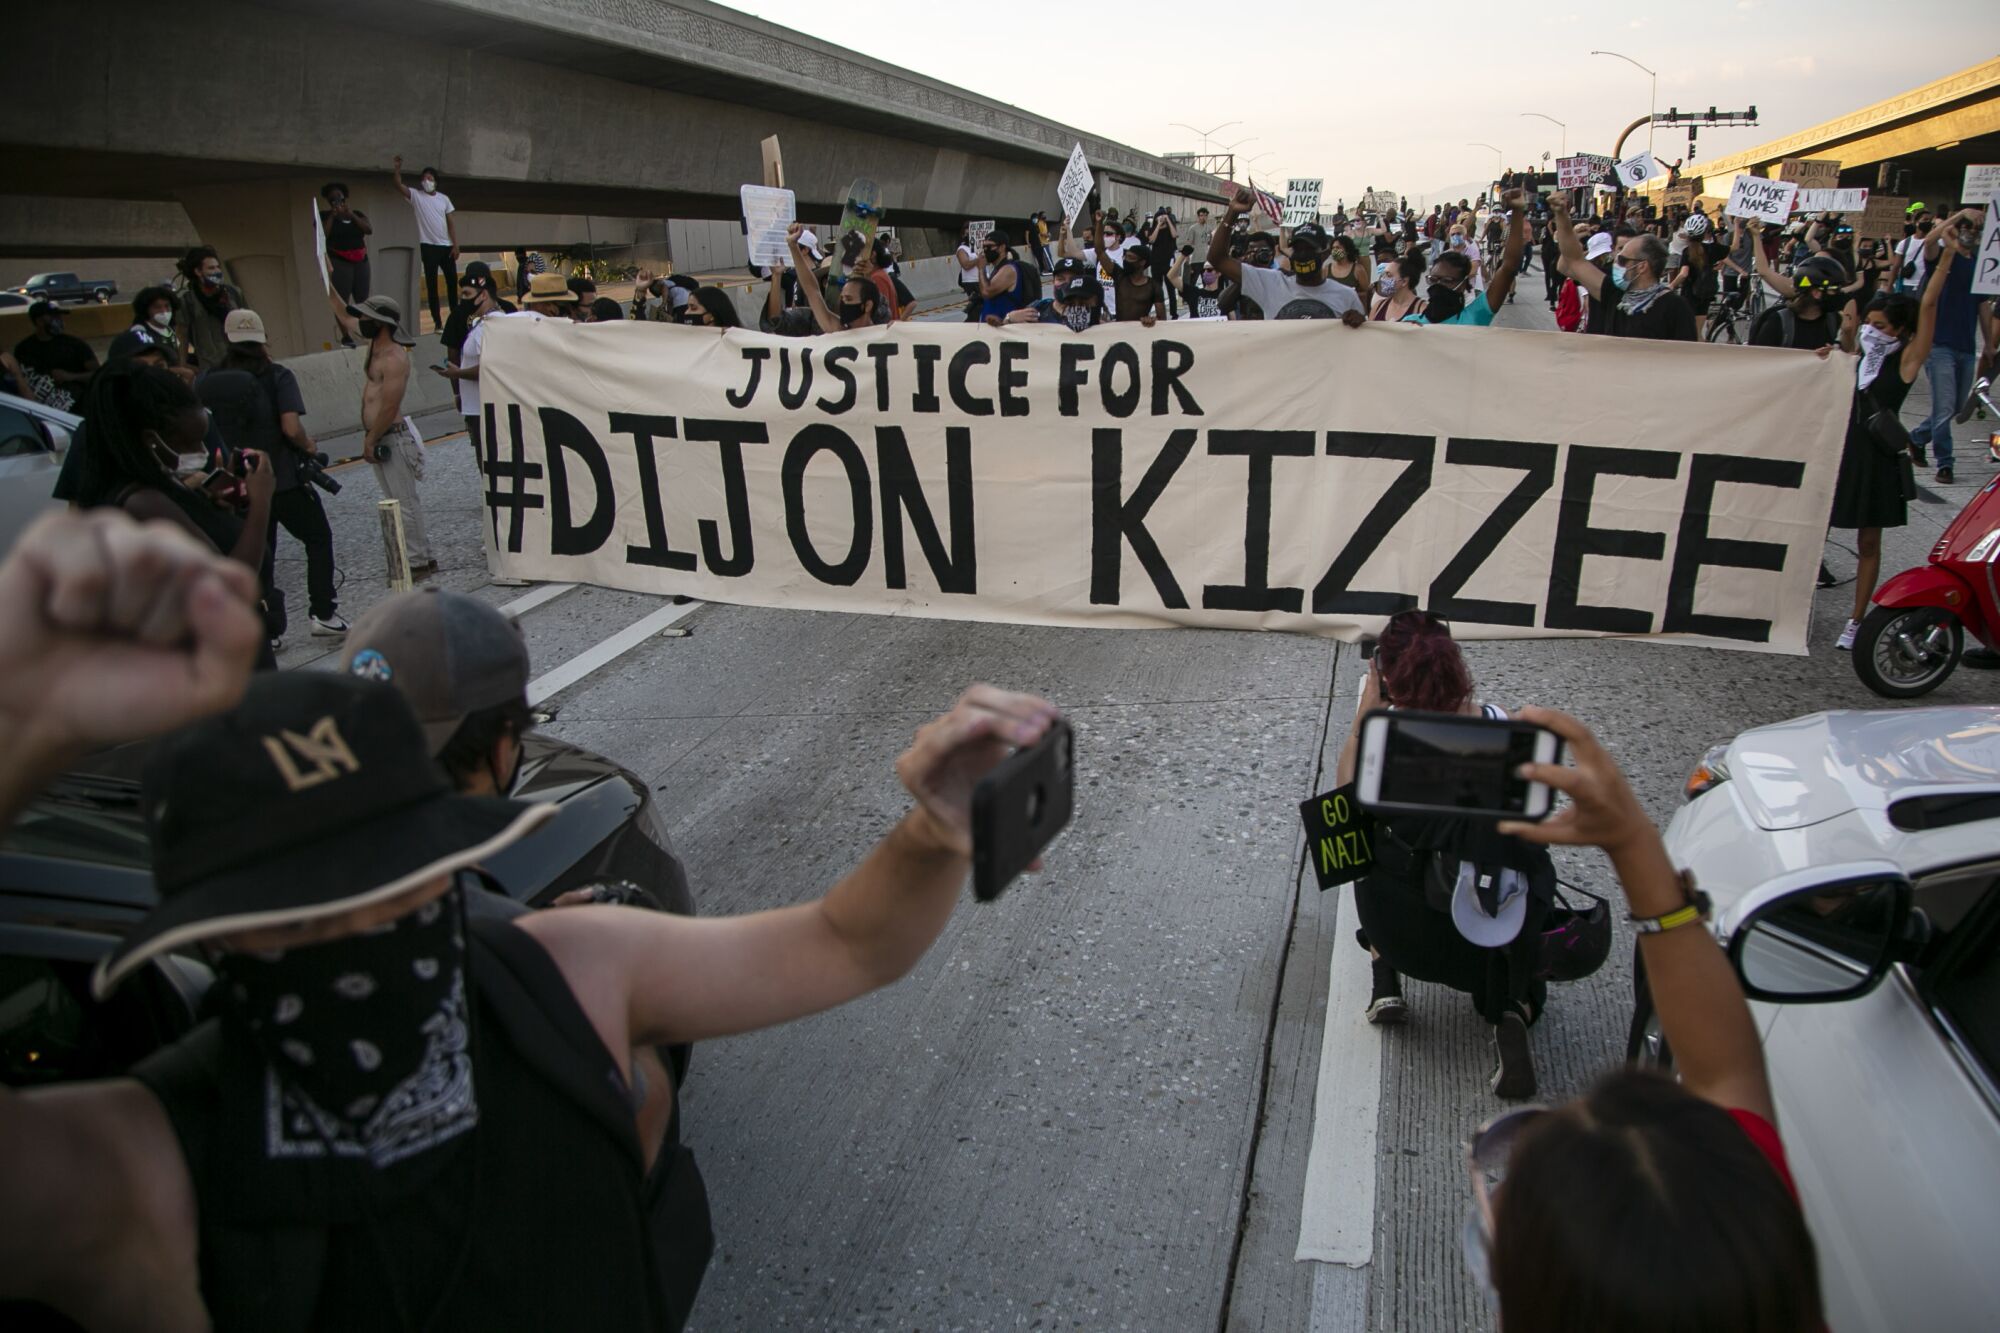 People on the freeway protest, holding a "Justice for #Dijon Kizzee" banner and shooting photos and film.